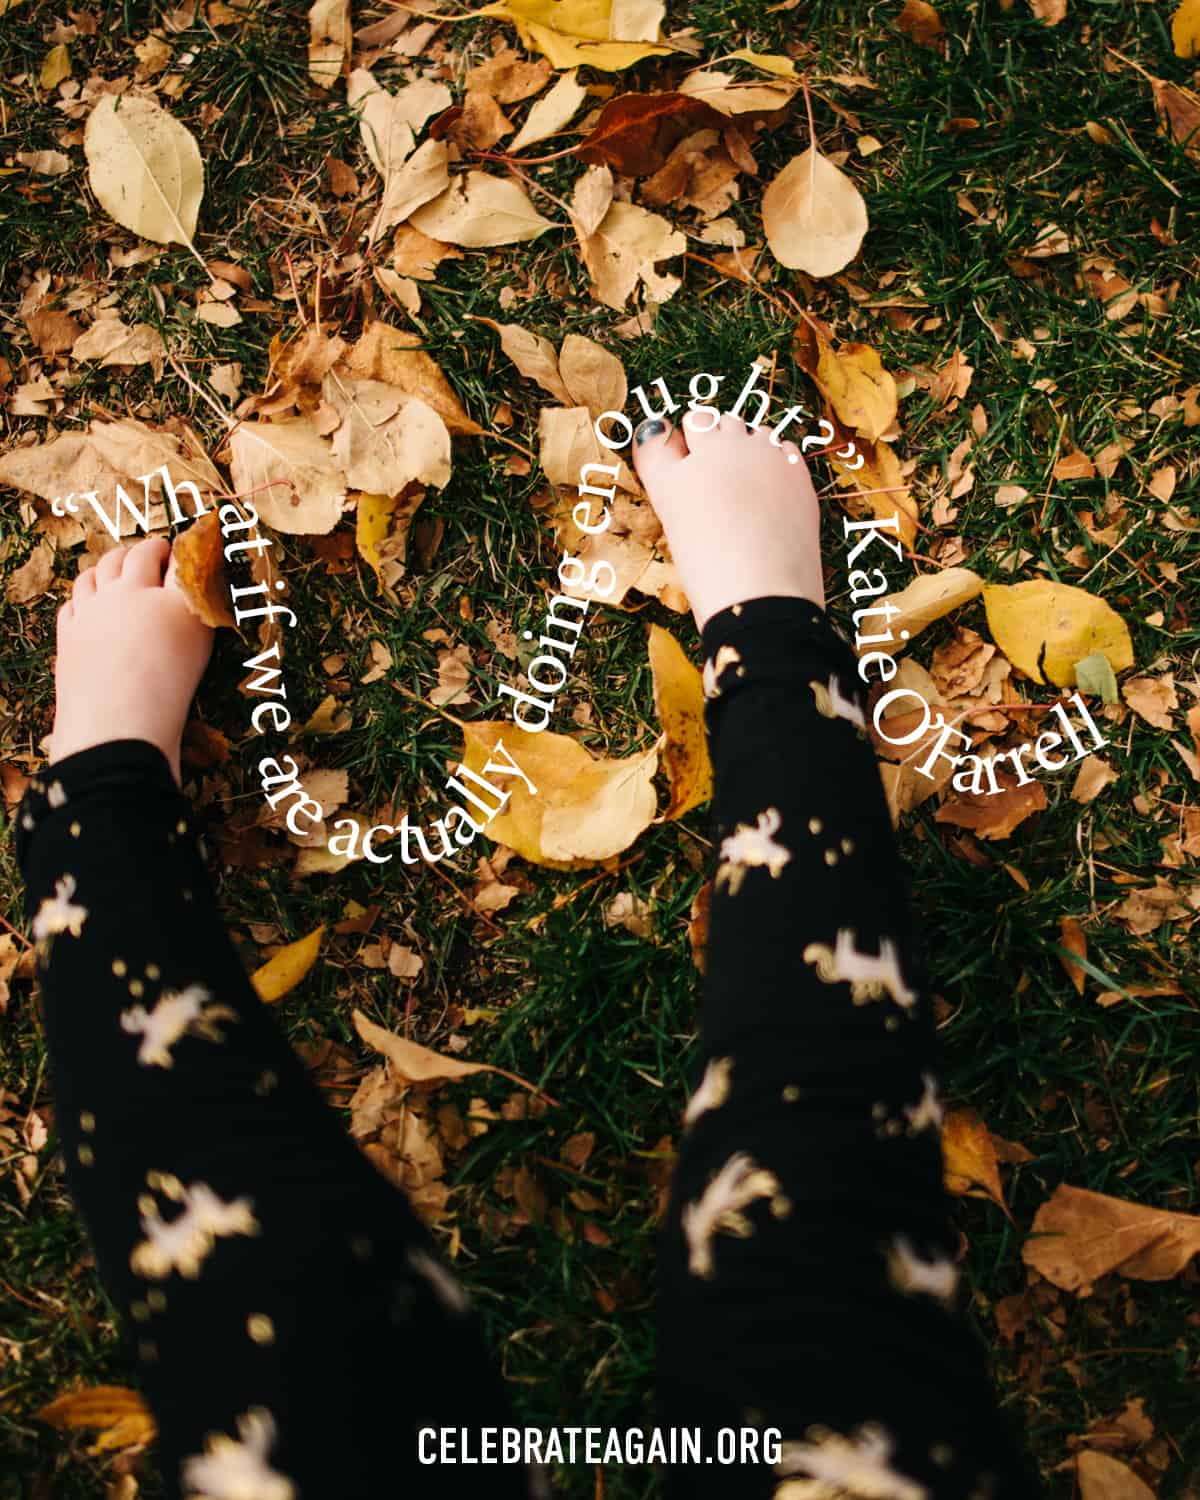 a self love quote saying “What if we are actually doing enought?” Katie O’Farrell over a photo of kid toes and fall leaves